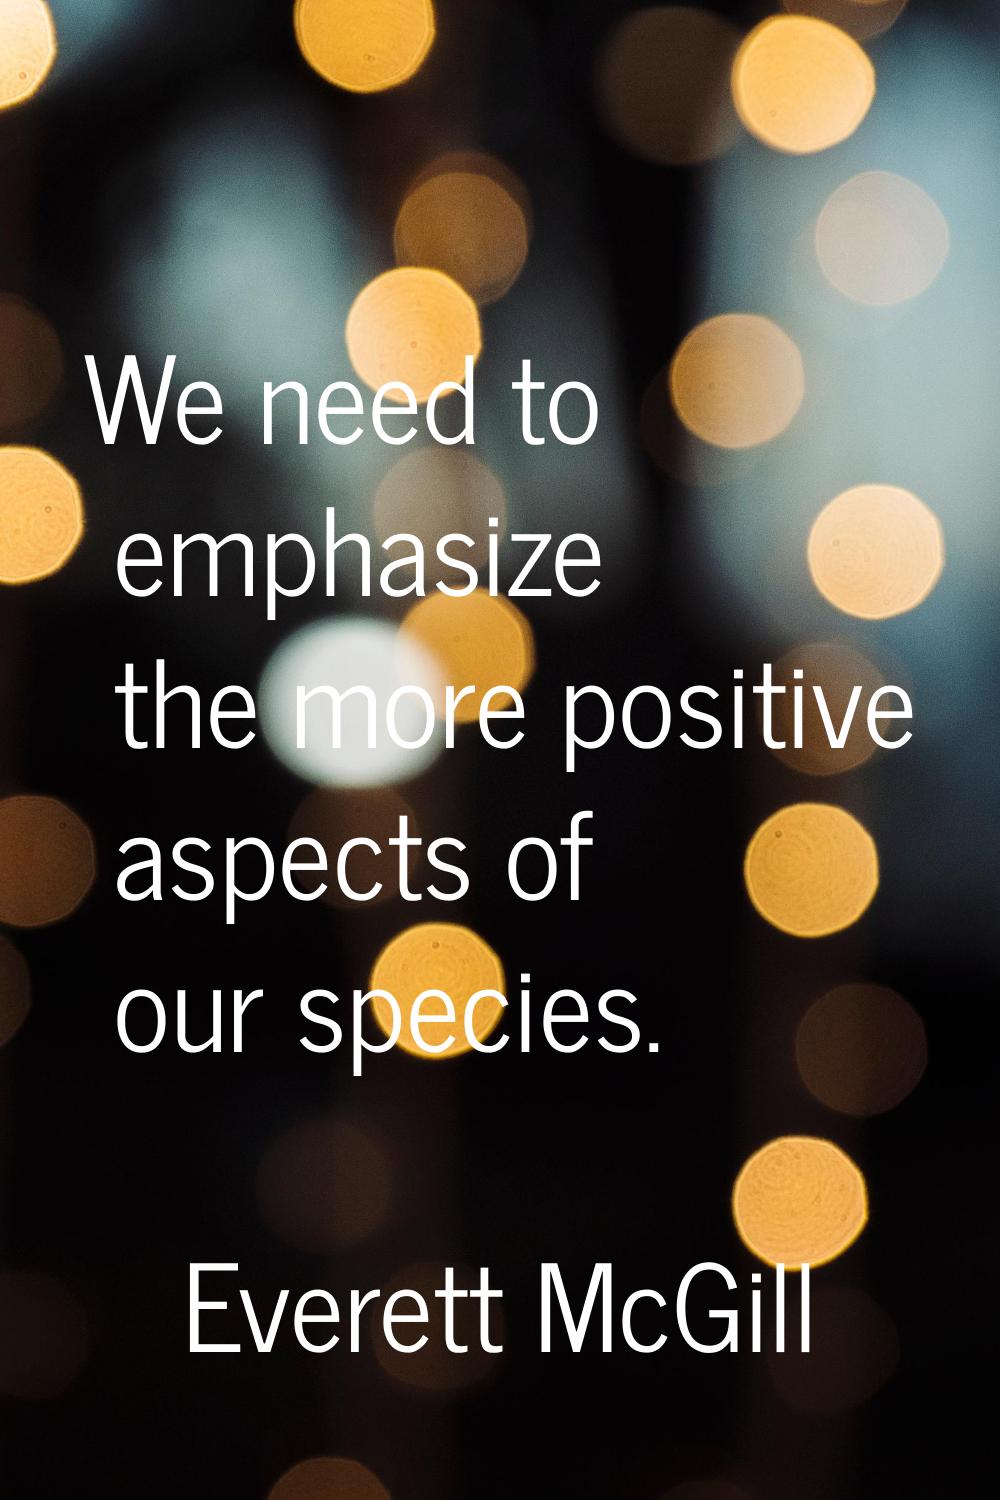 We need to emphasize the more positive aspects of our species.